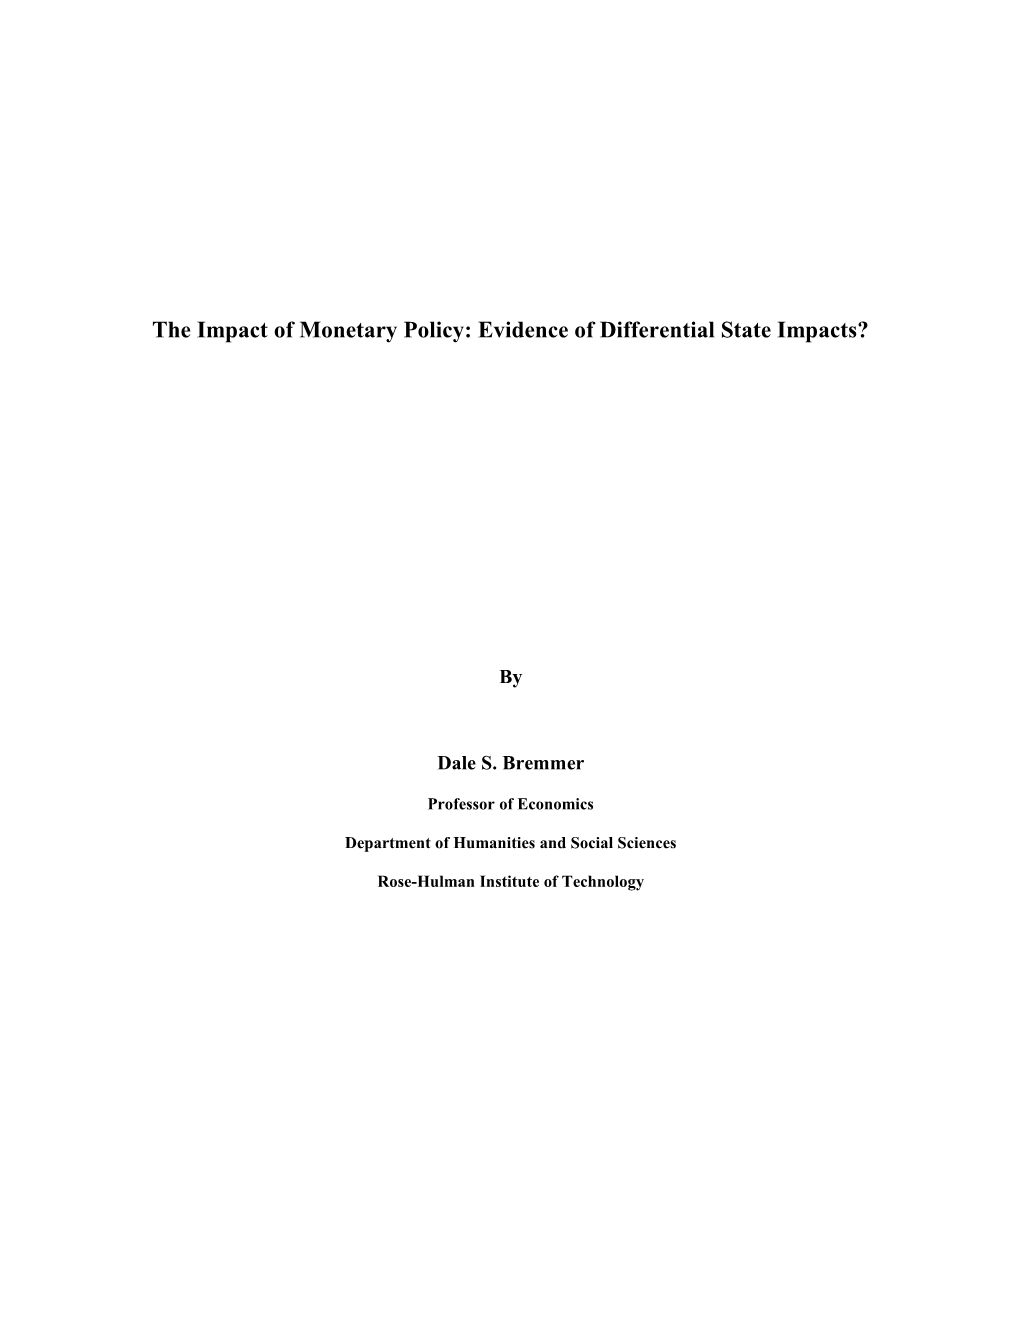 The Impact of Monetary Policy: Evidence of Differential State Impacts?